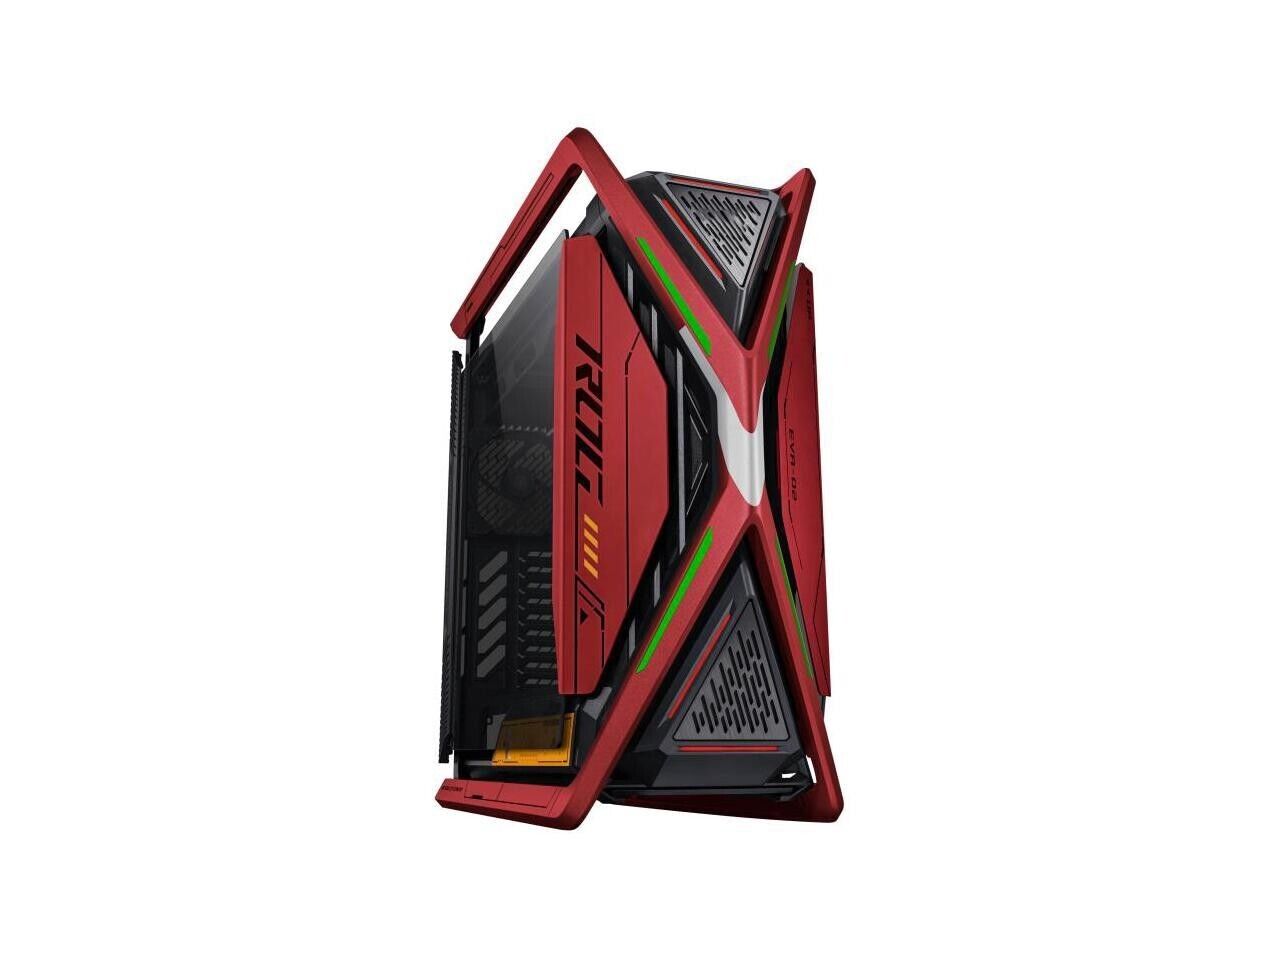 ASUS ROG Case Hyperion EVA-02 Edition, Expansion slots 9, 3 - LIMITED EDITION